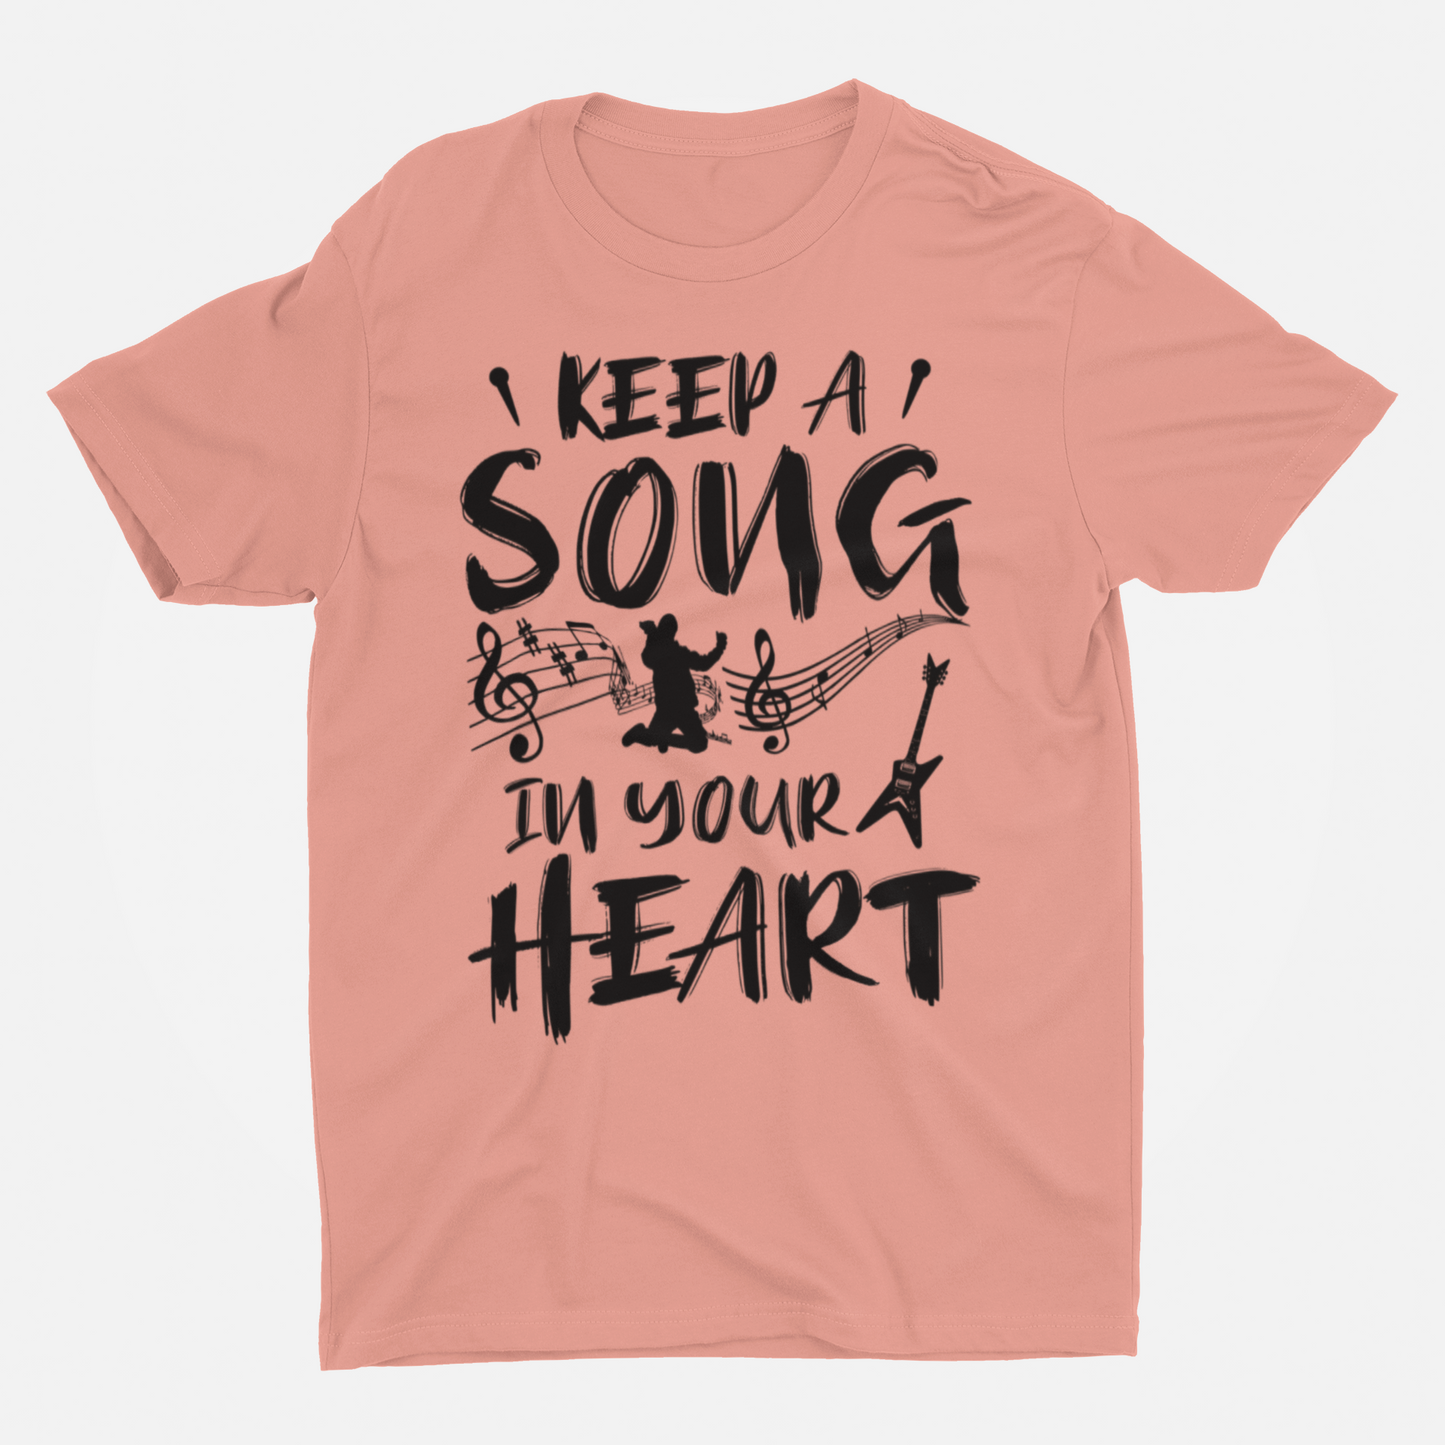 Keep Song In Your Heart Peach Round Neck T-Shirt for Men